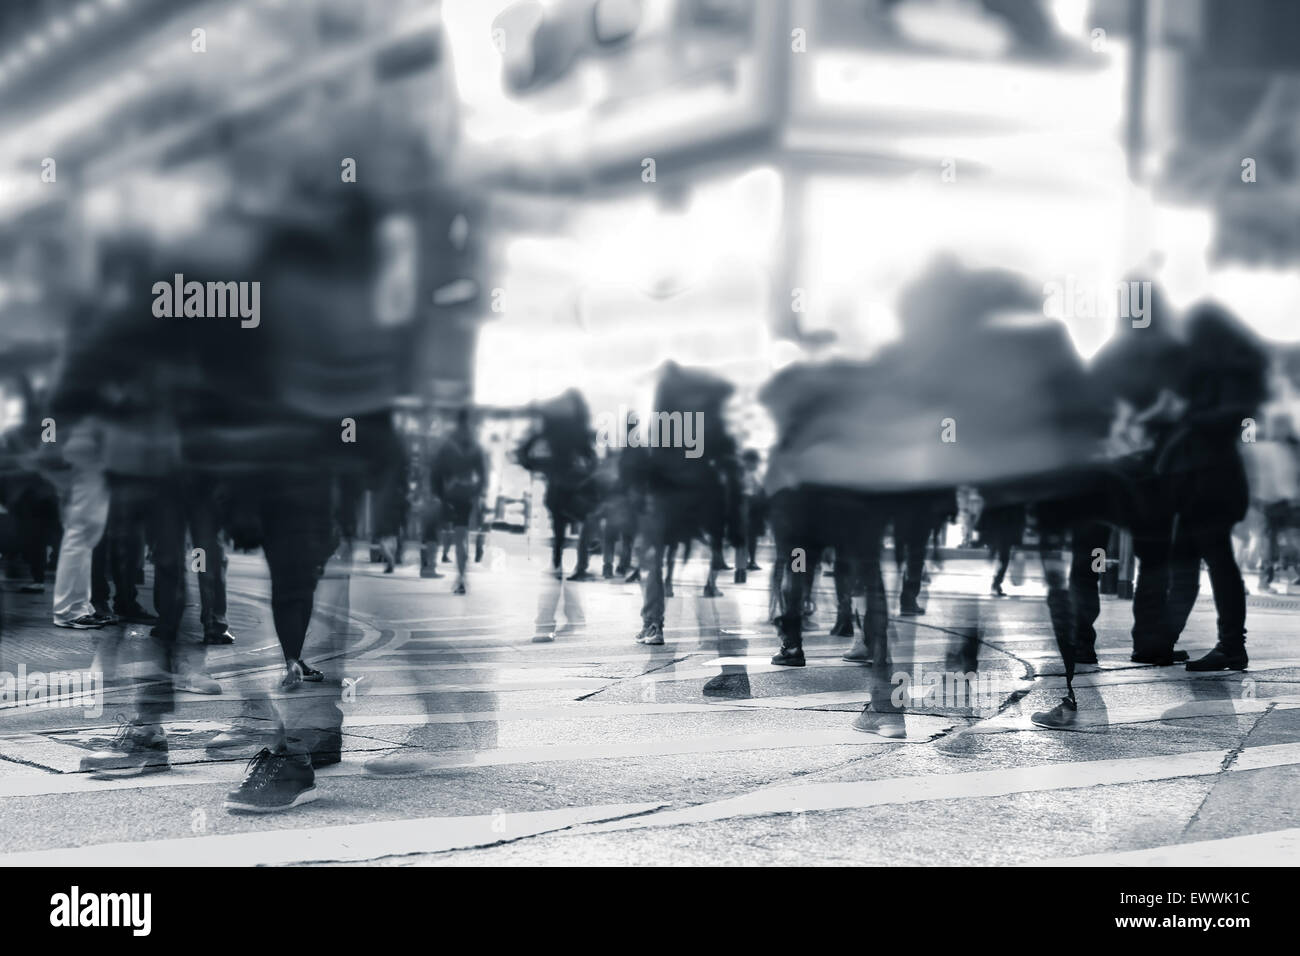 Blurred image of people moving in crowded night city street. Art toning abstract urban background. Hong Kong Stock Photo